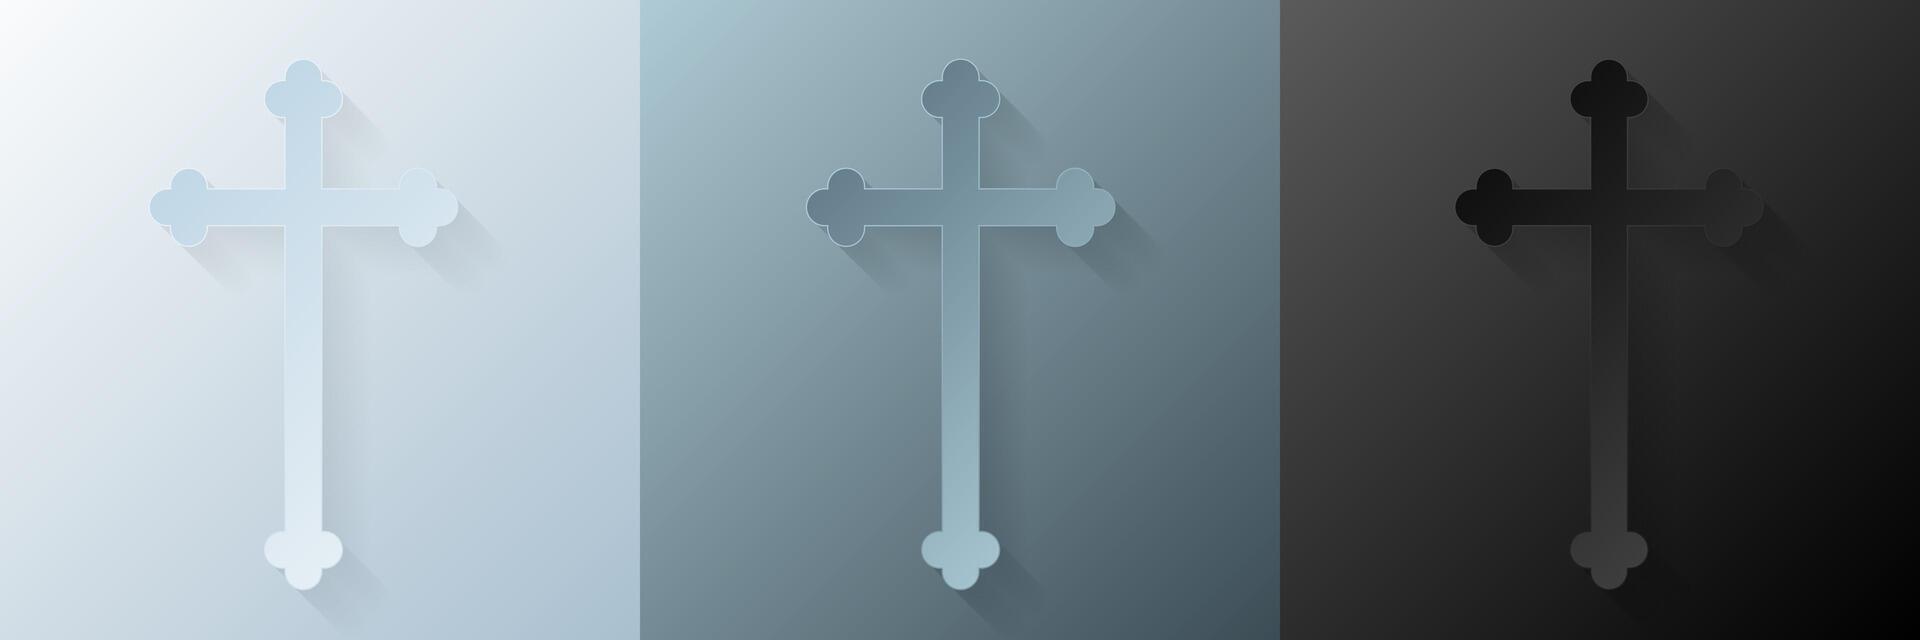 Papercut Christian cross. 3D Papercraft religious crucifix icon for posters and flyers, presentation, web, social media, design, banner, stickers, obituary, death notice or card of condolence. vector